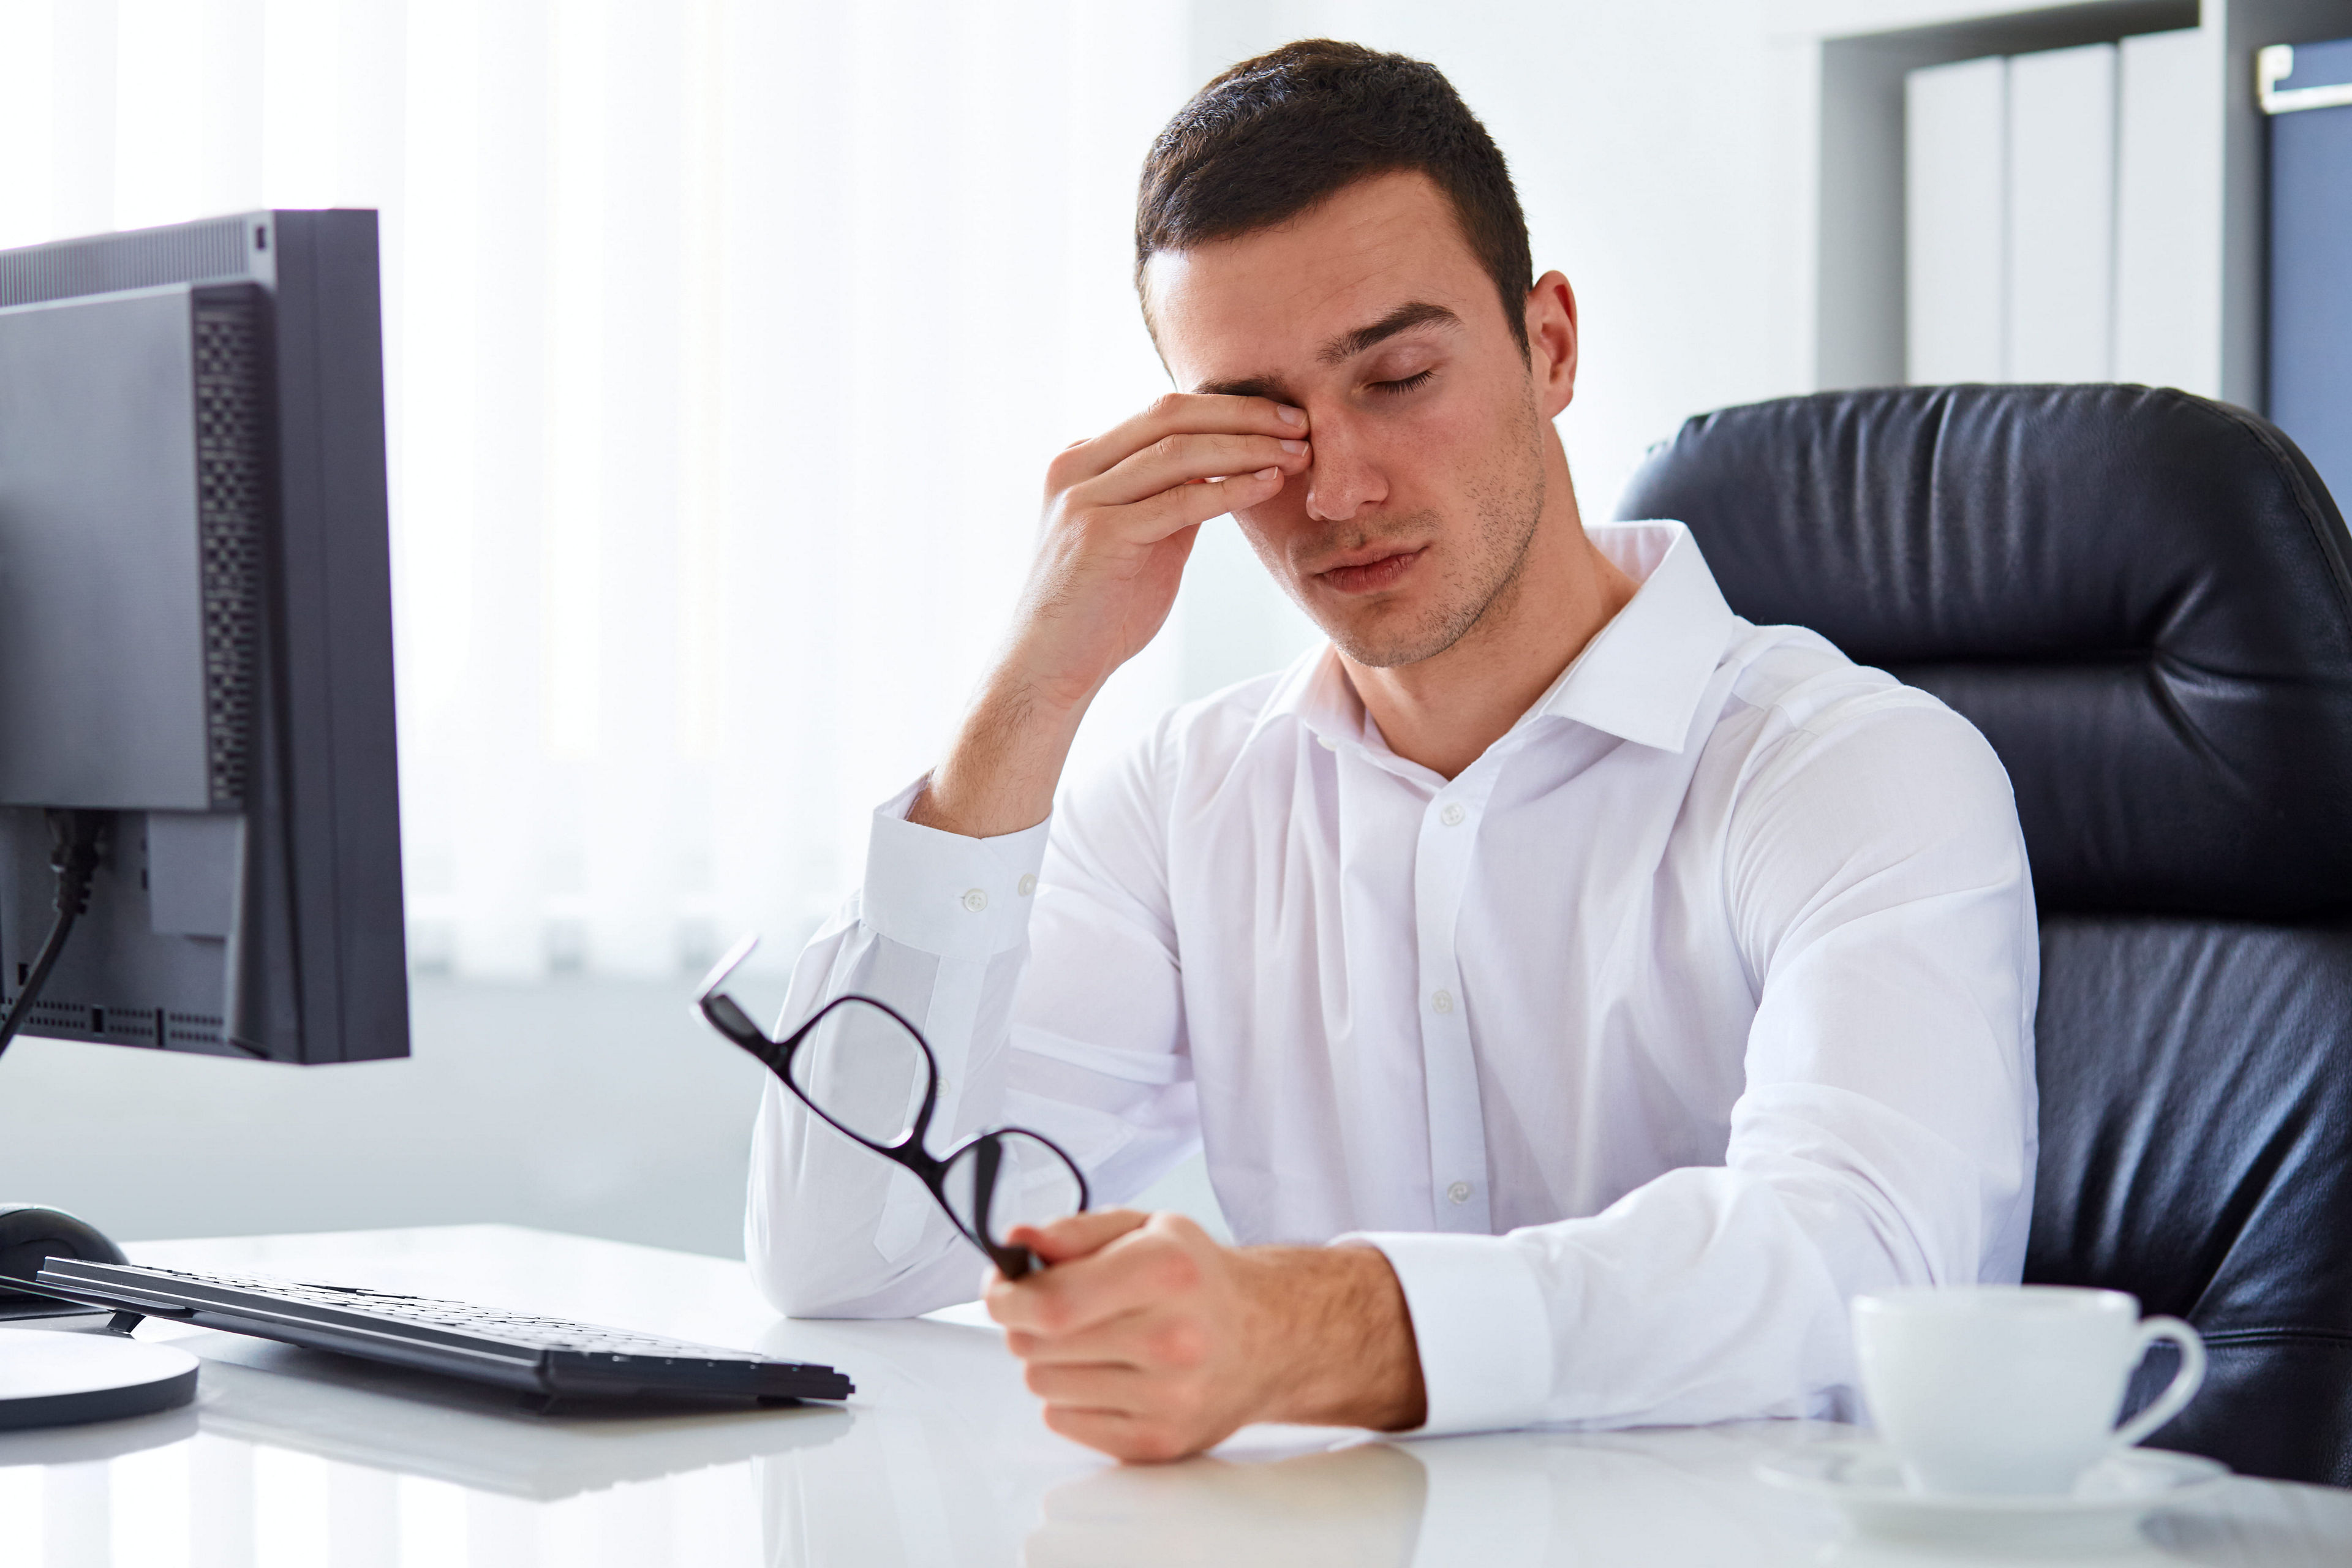 How long does eye strain last? Possible symptoms and prevention